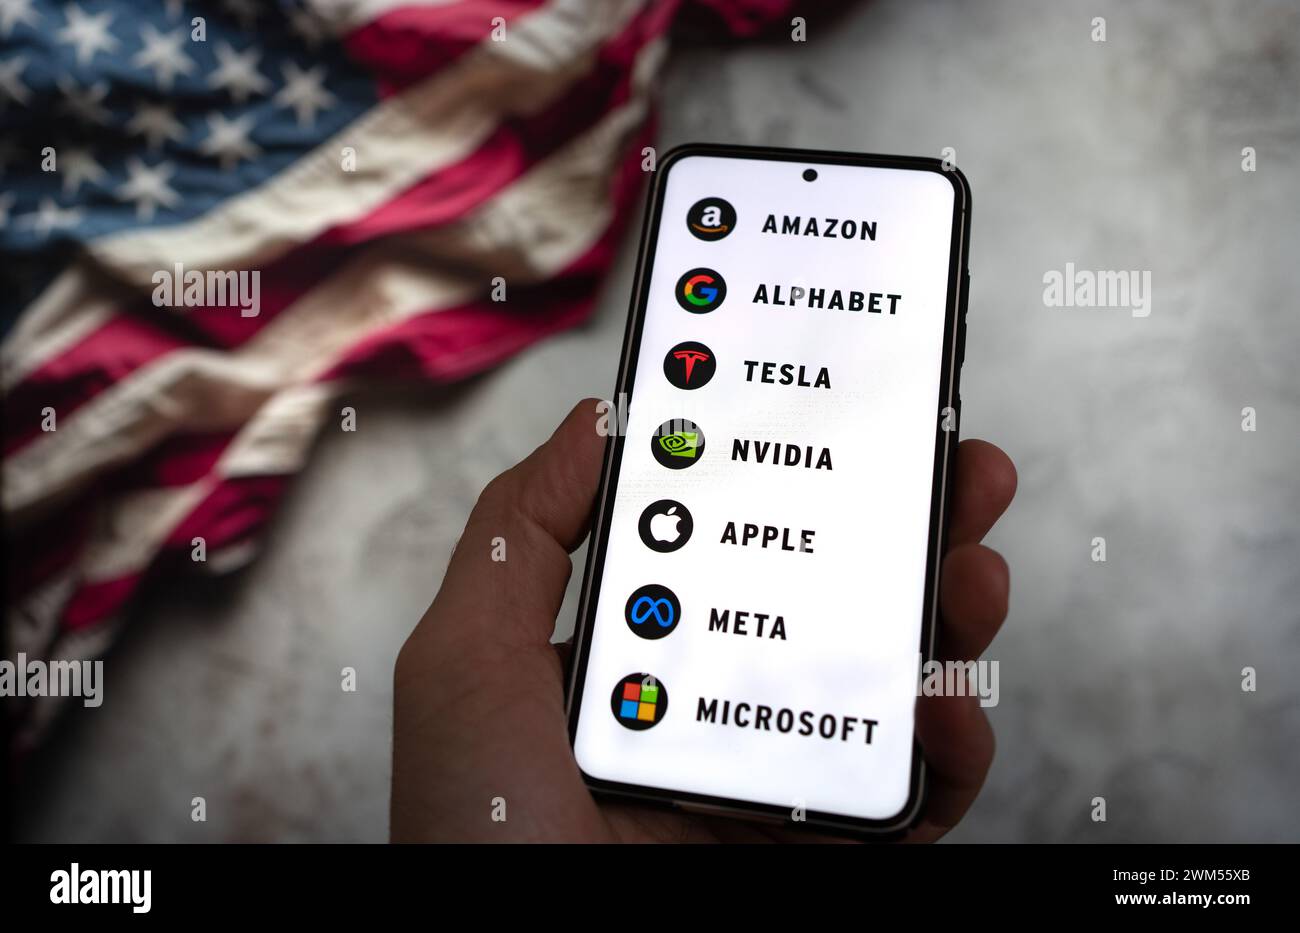 Magnificent Seven - The biggest companies in information technology displayed on smartphone Stock Photo